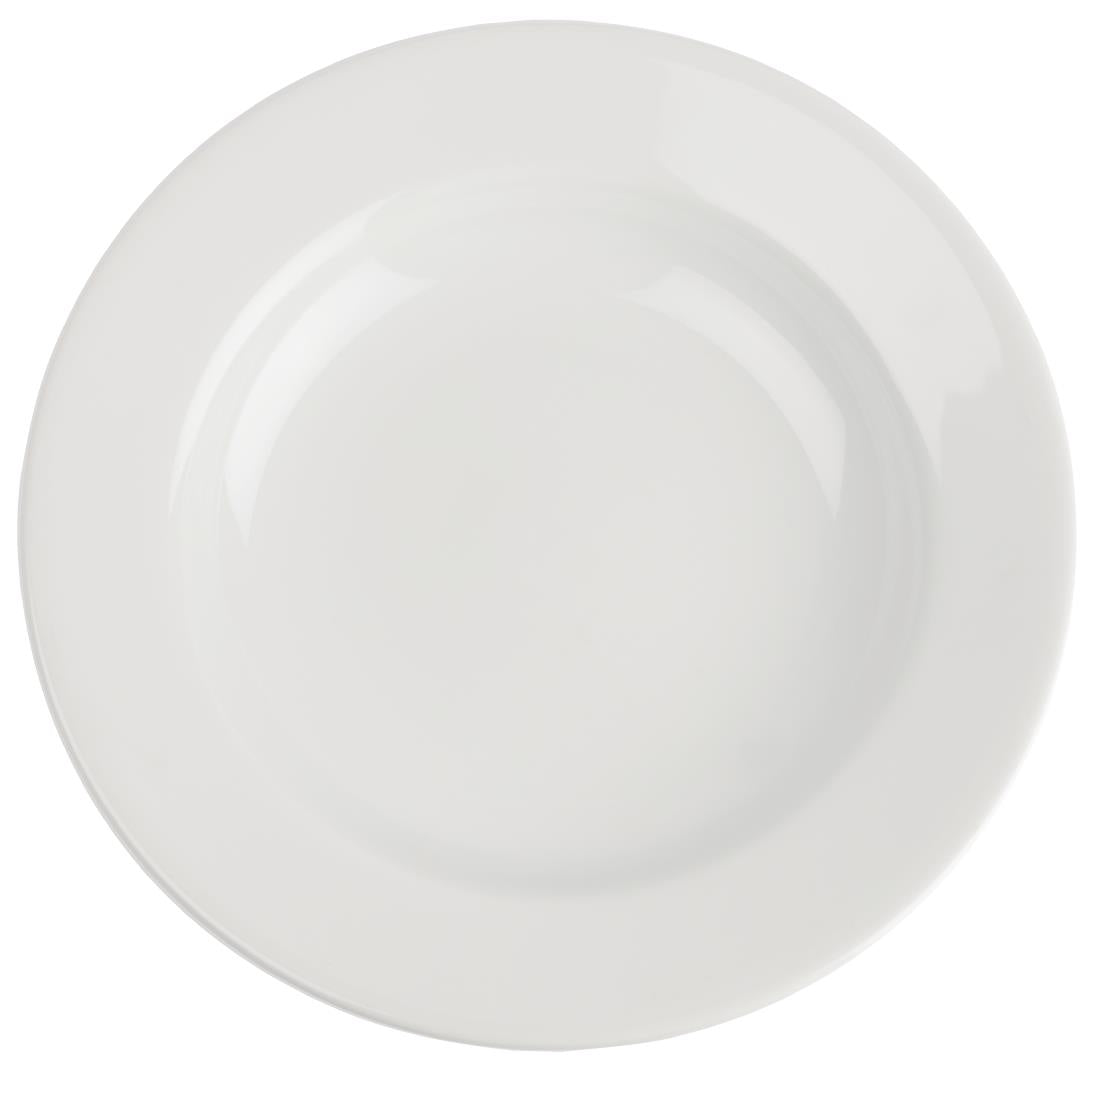 Royal Porcelain Classic White Wide Rim Plates 160mm (Pack of 12)